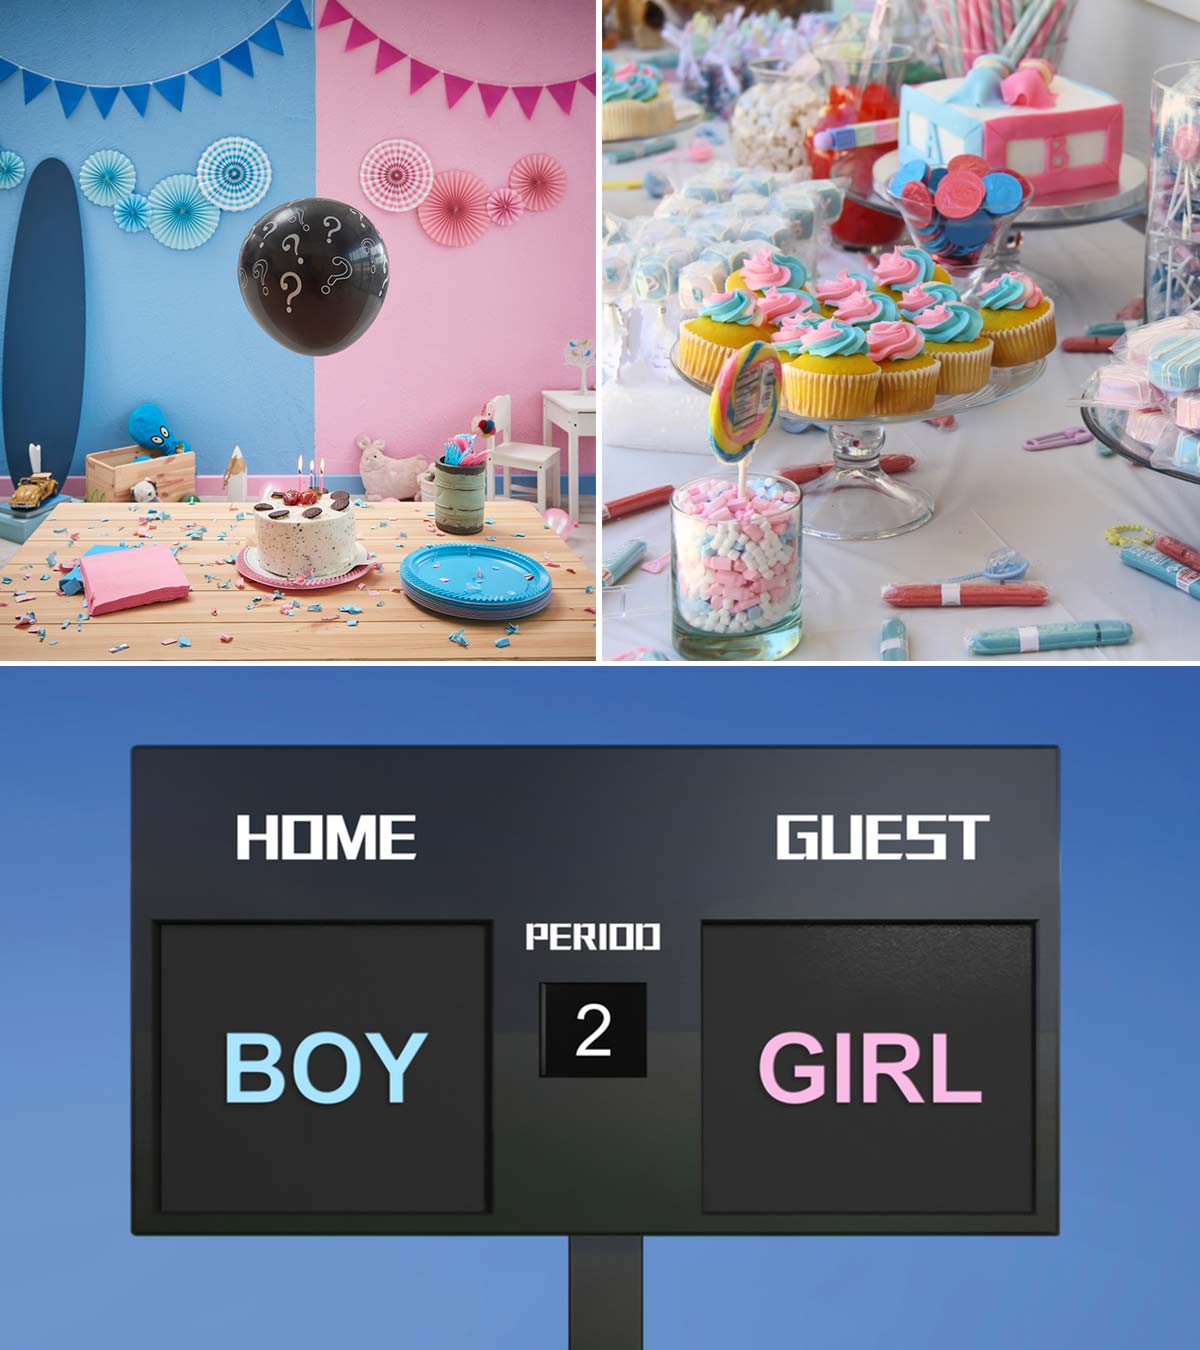 Best Welcome Baby Room Decoration Ideas [2022] - Party Dost